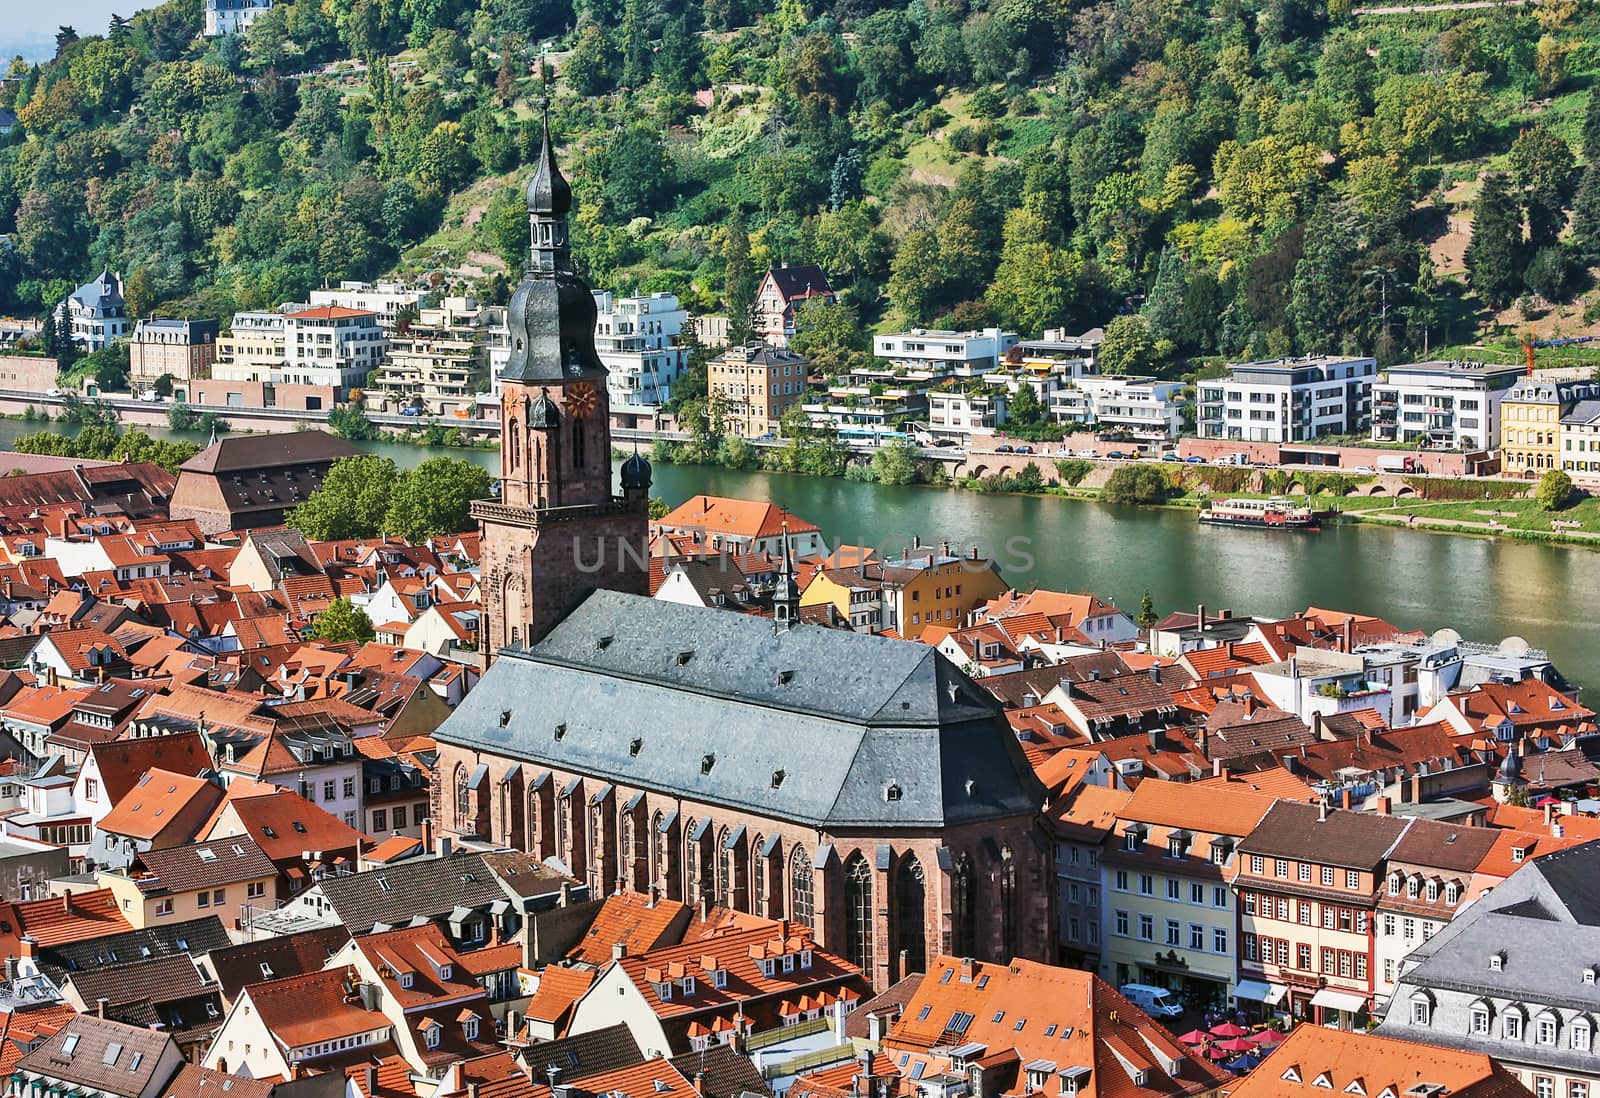 Top view of the Heidelberg,Germany by borisb17